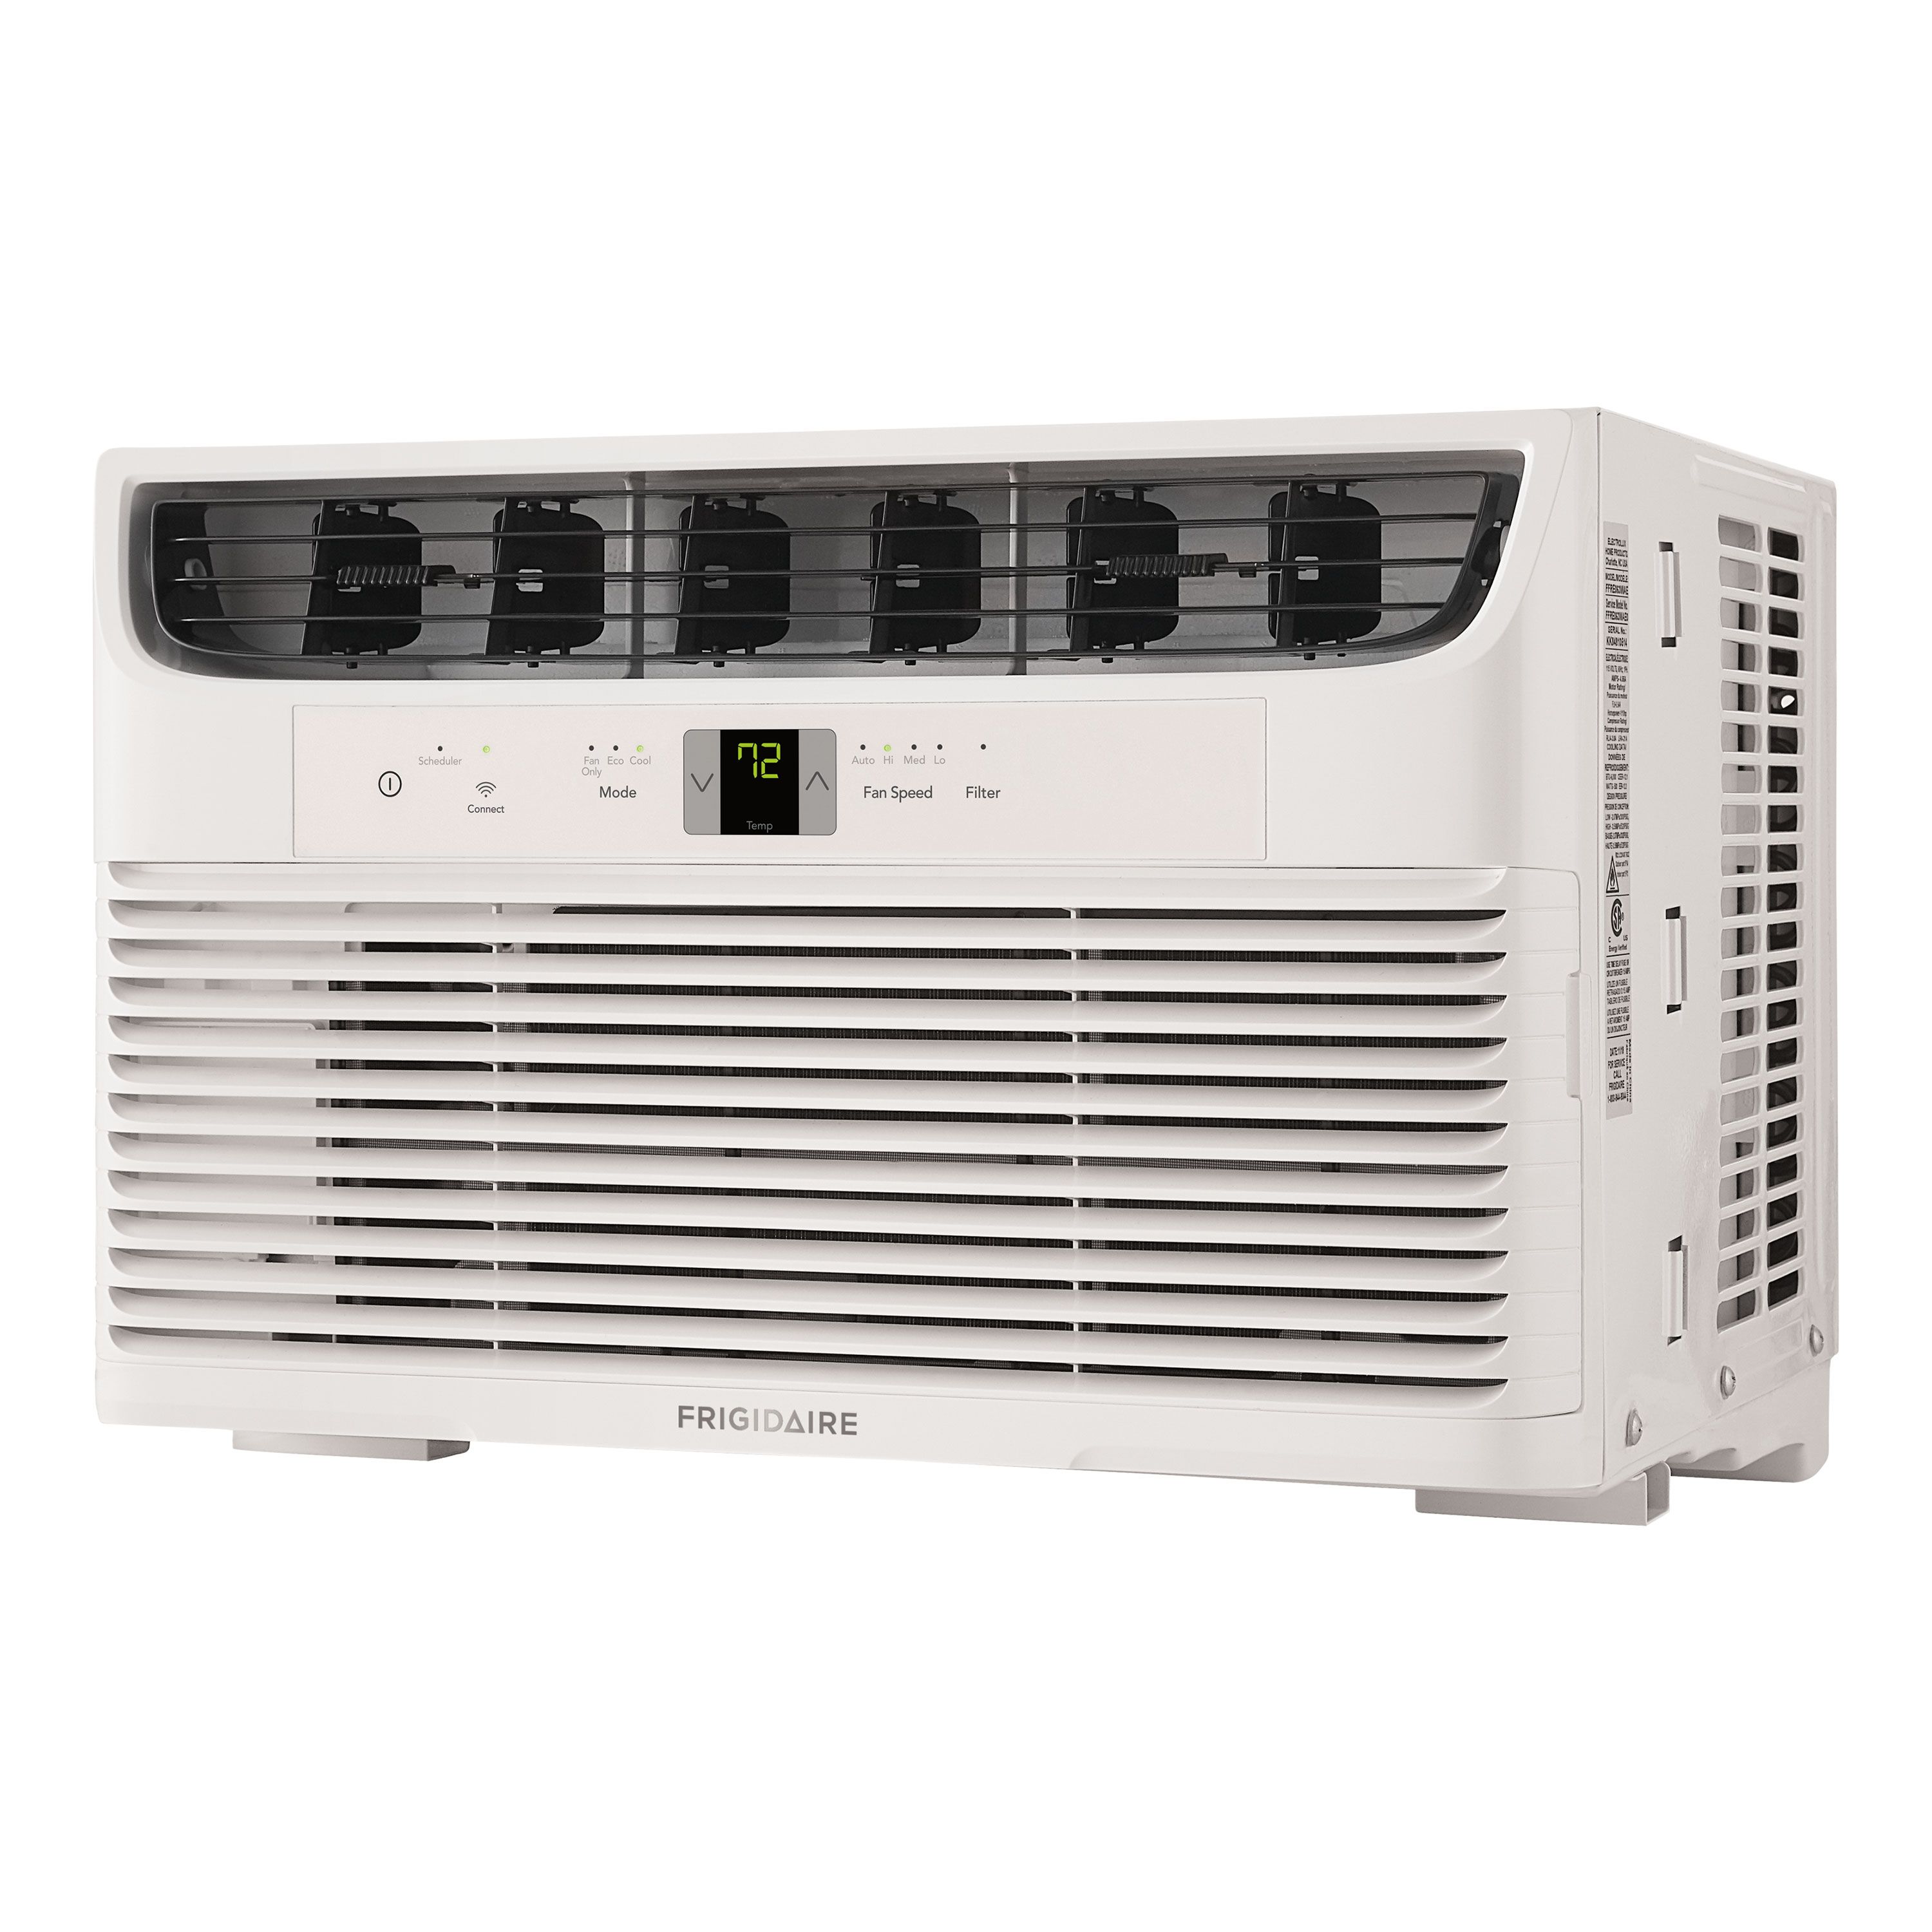 Frigidaire 12,000 BTU 115-Volt Window Air Conditioner with Remote, WIFI, White, FHWW122WCE - image 1 of 3